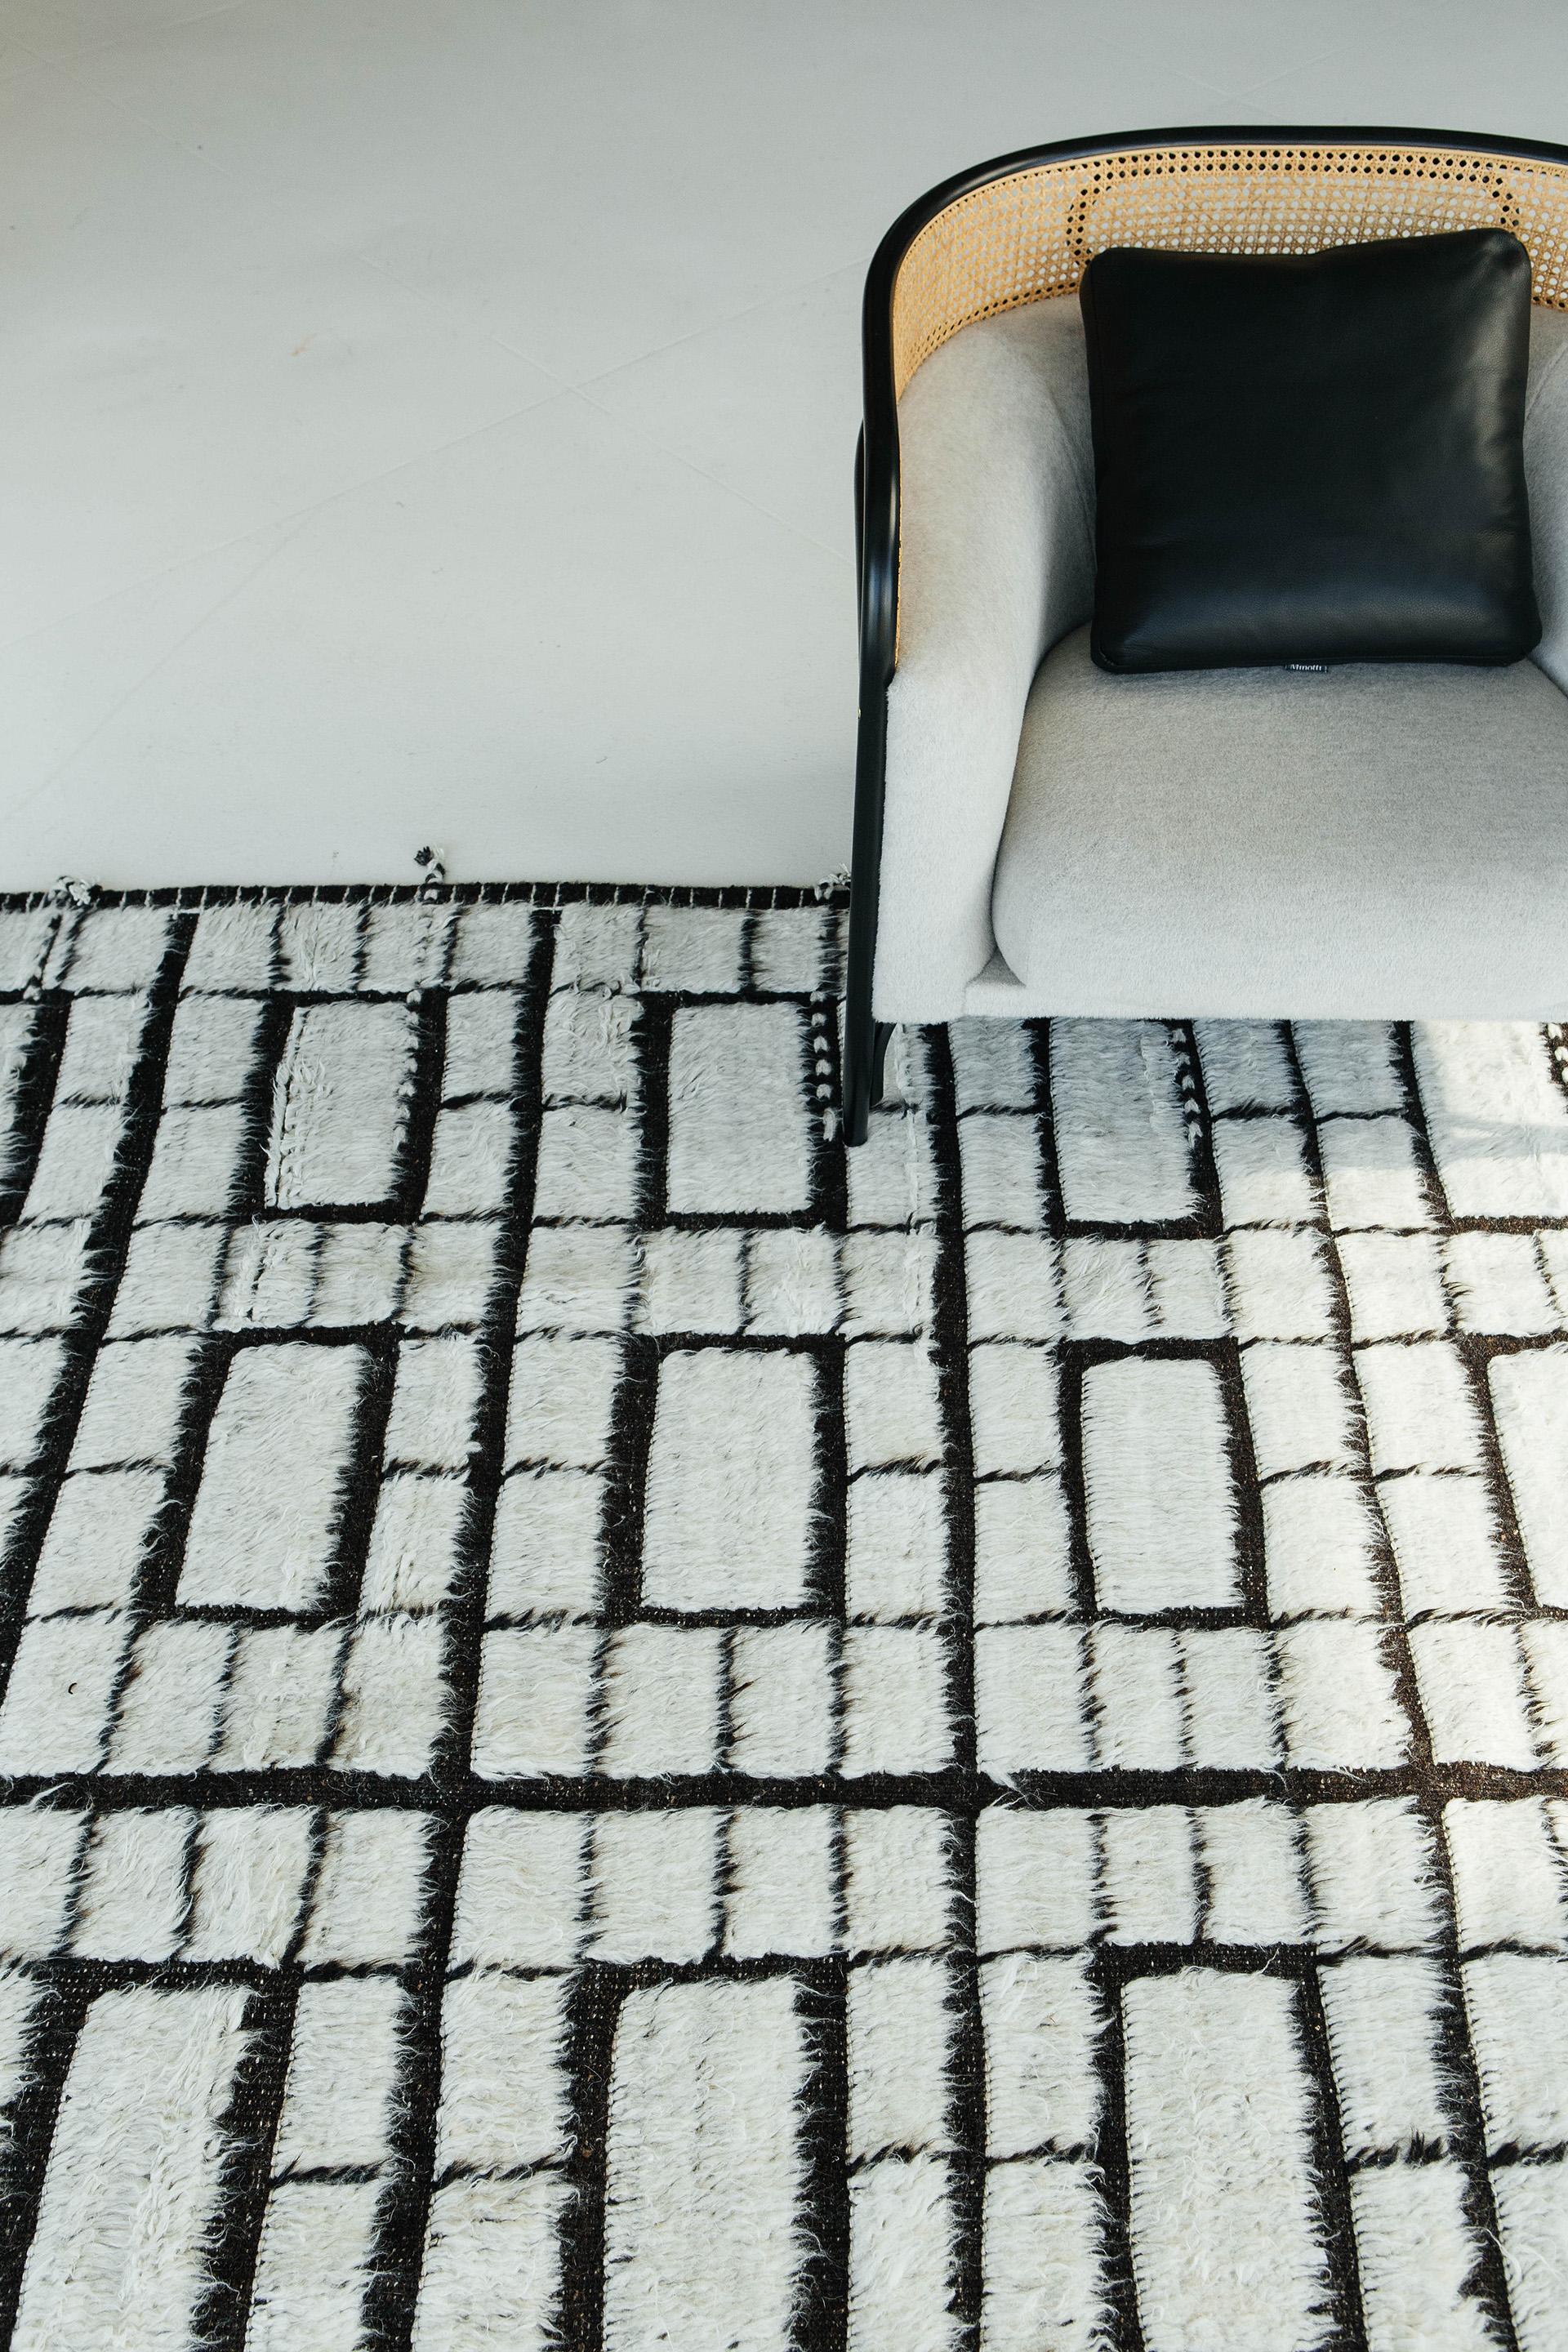 Oroshi is named after strong Japanese winds. This piece from Mehraban's Haute Bohemian collection has timeless checkered design elements and natural earth tones with the perfect shade of white shag and black flat-weave. Oroshi is also bordered with